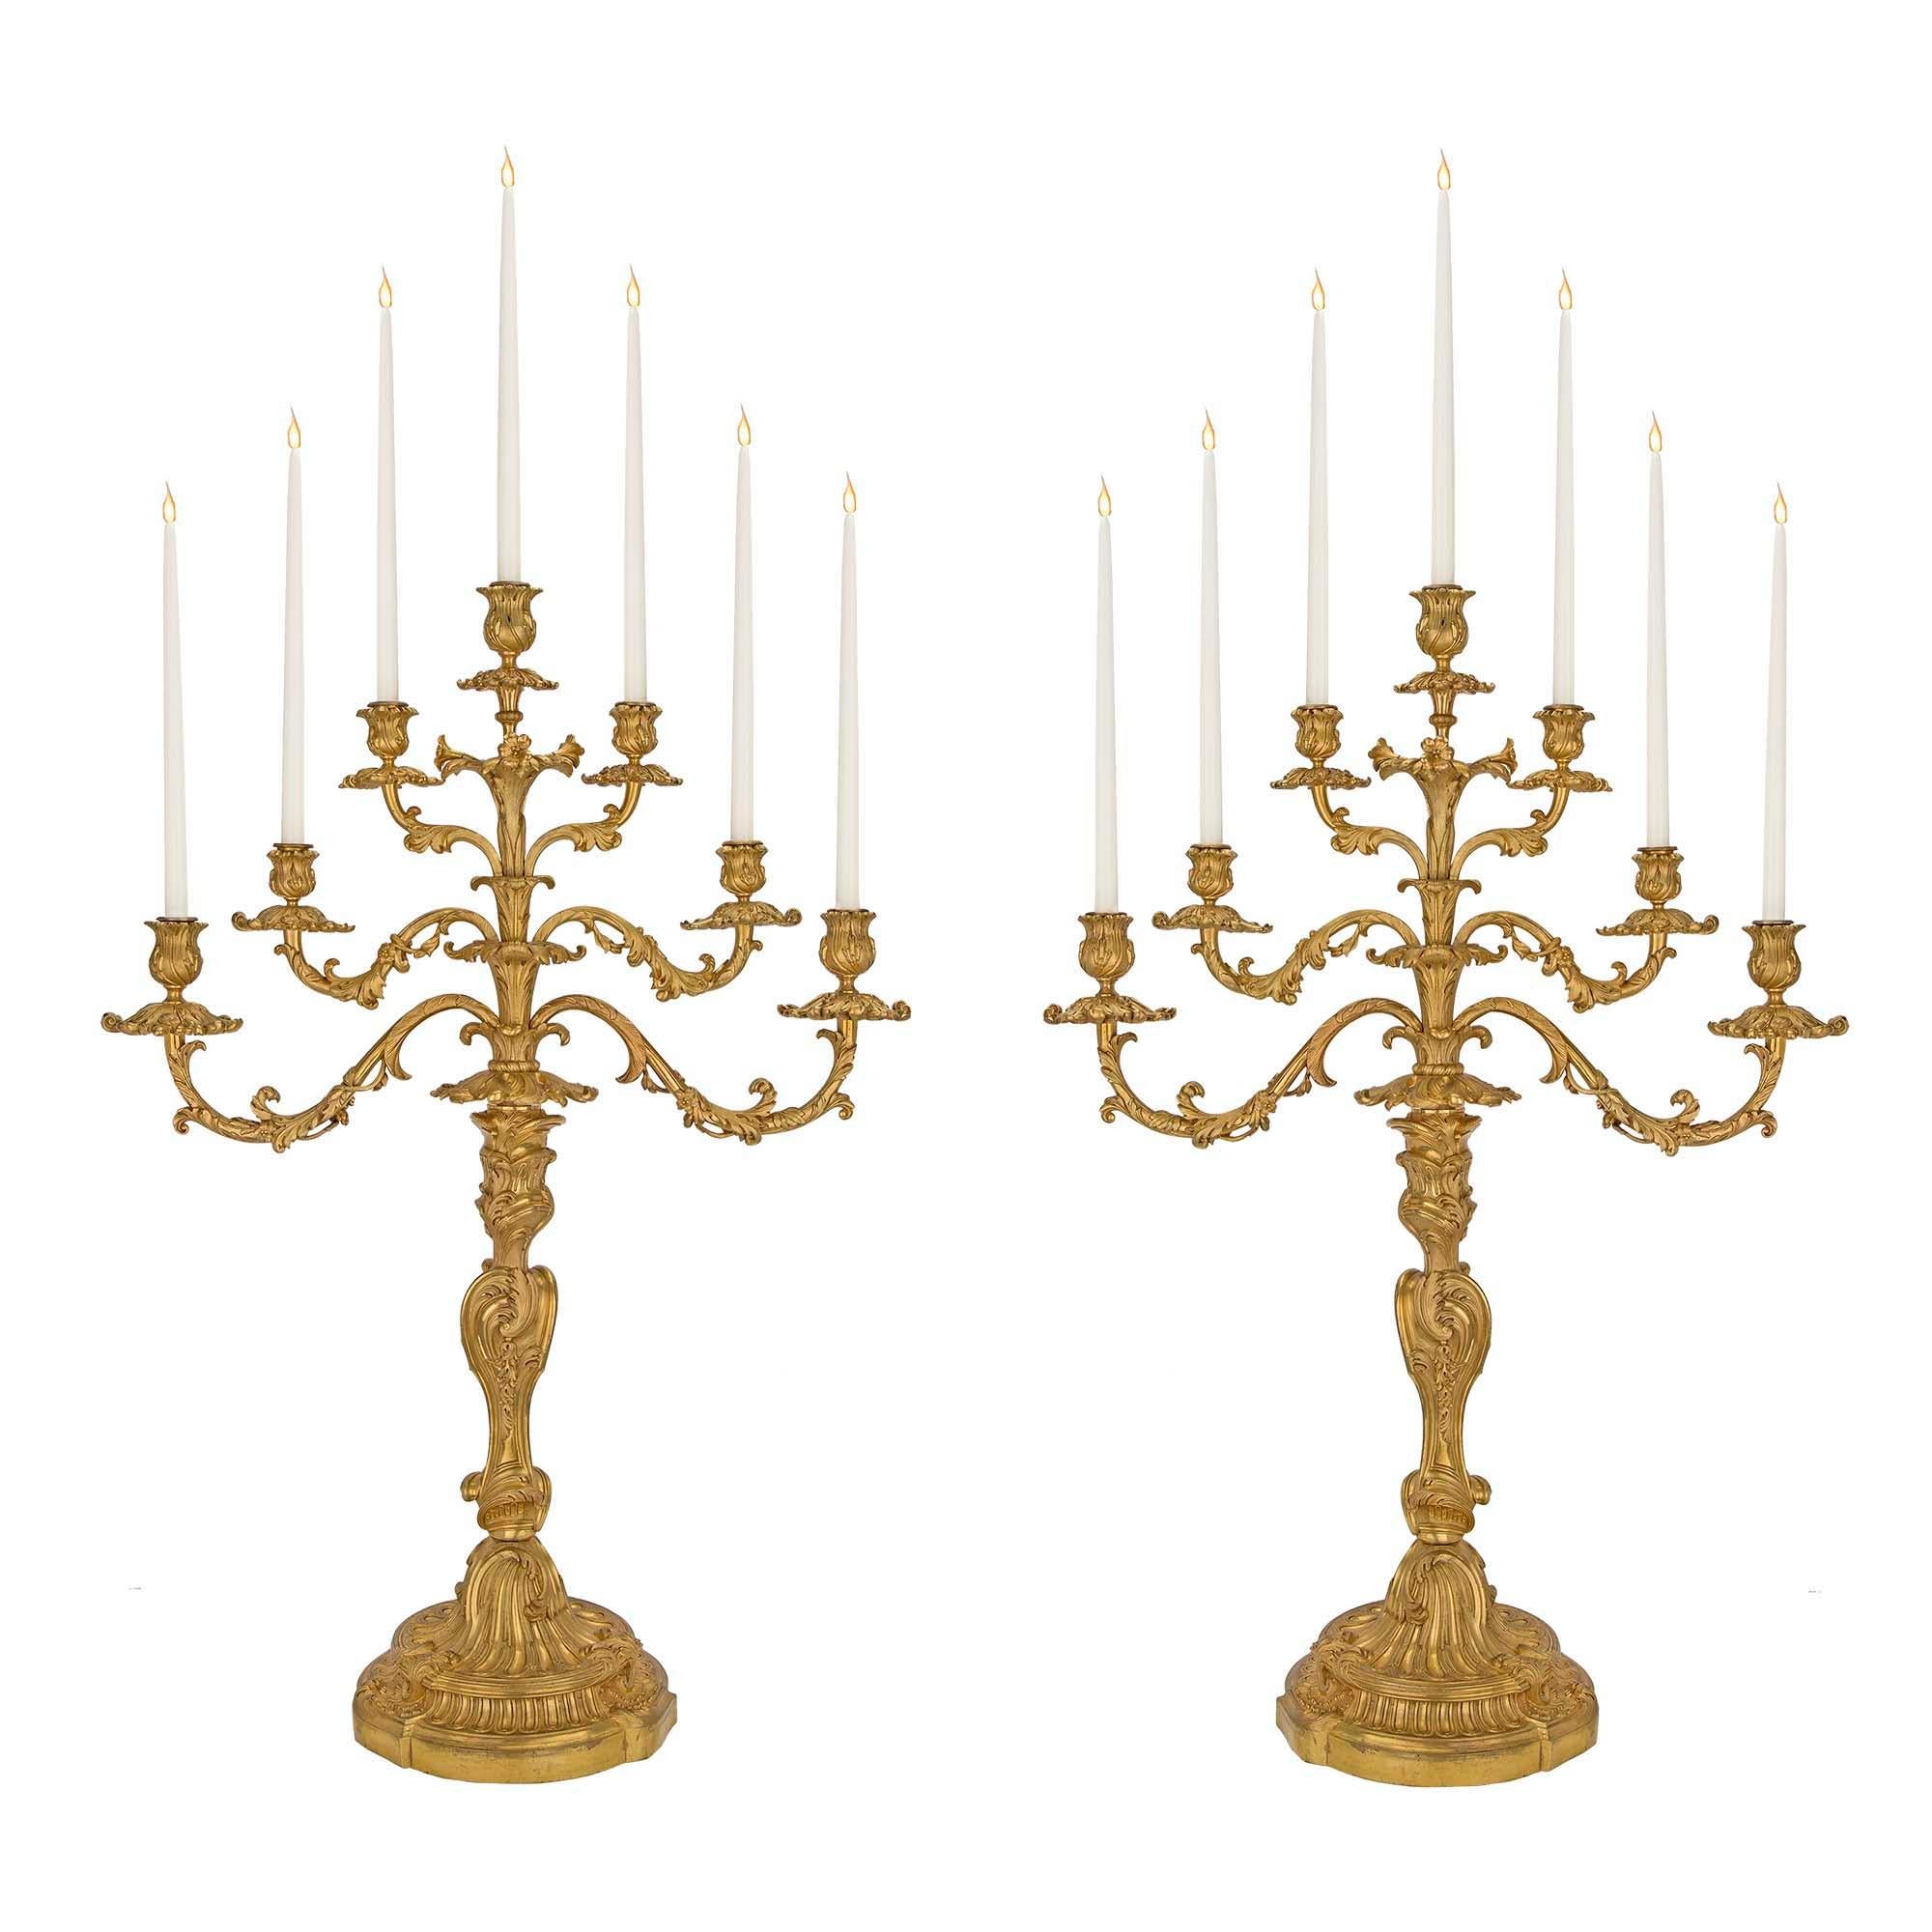 Pair of French Early 18th Century Régence Period Ormolu Candelabras For Sale